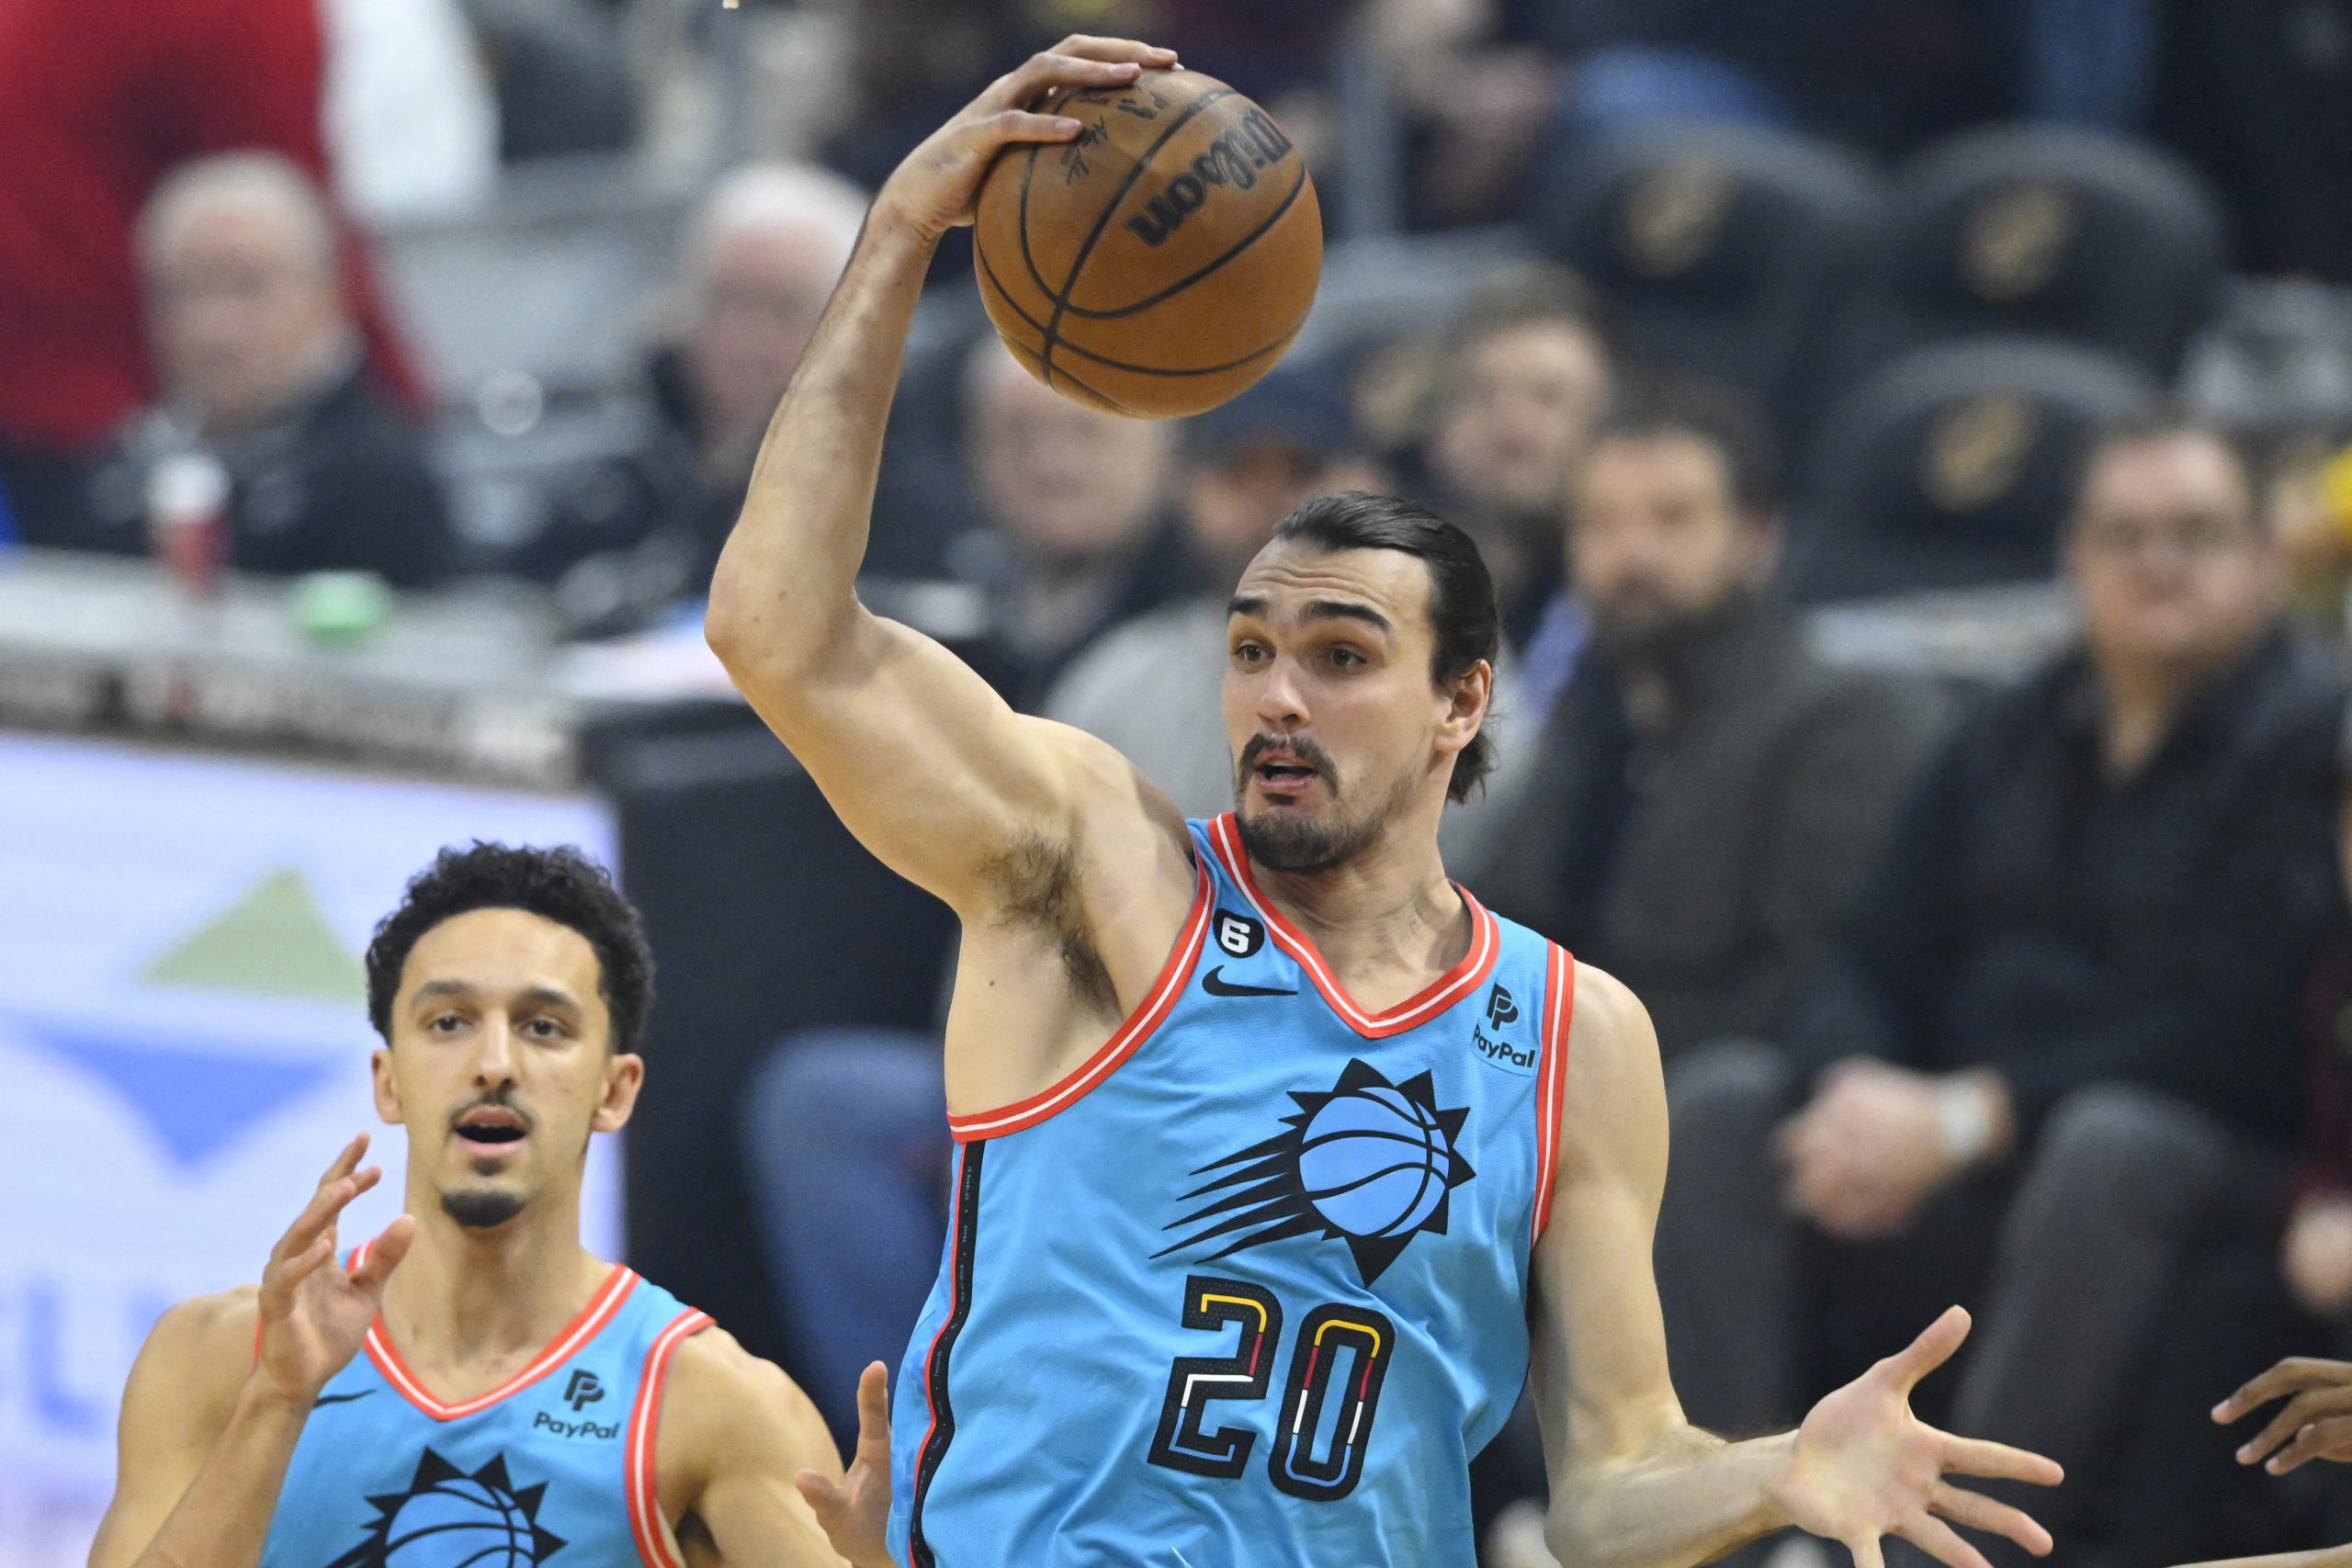 Jan 4, 2023; Cleveland, Ohio, USA; Phoenix Suns forward Dario Saric (20) rebounds in the first quarter against the Cleveland Cavaliers at Rocket Mortgage FieldHouse. Mandatory Credit: David Richard-USA TODAY Sports Photo: David Richard/REUTERS